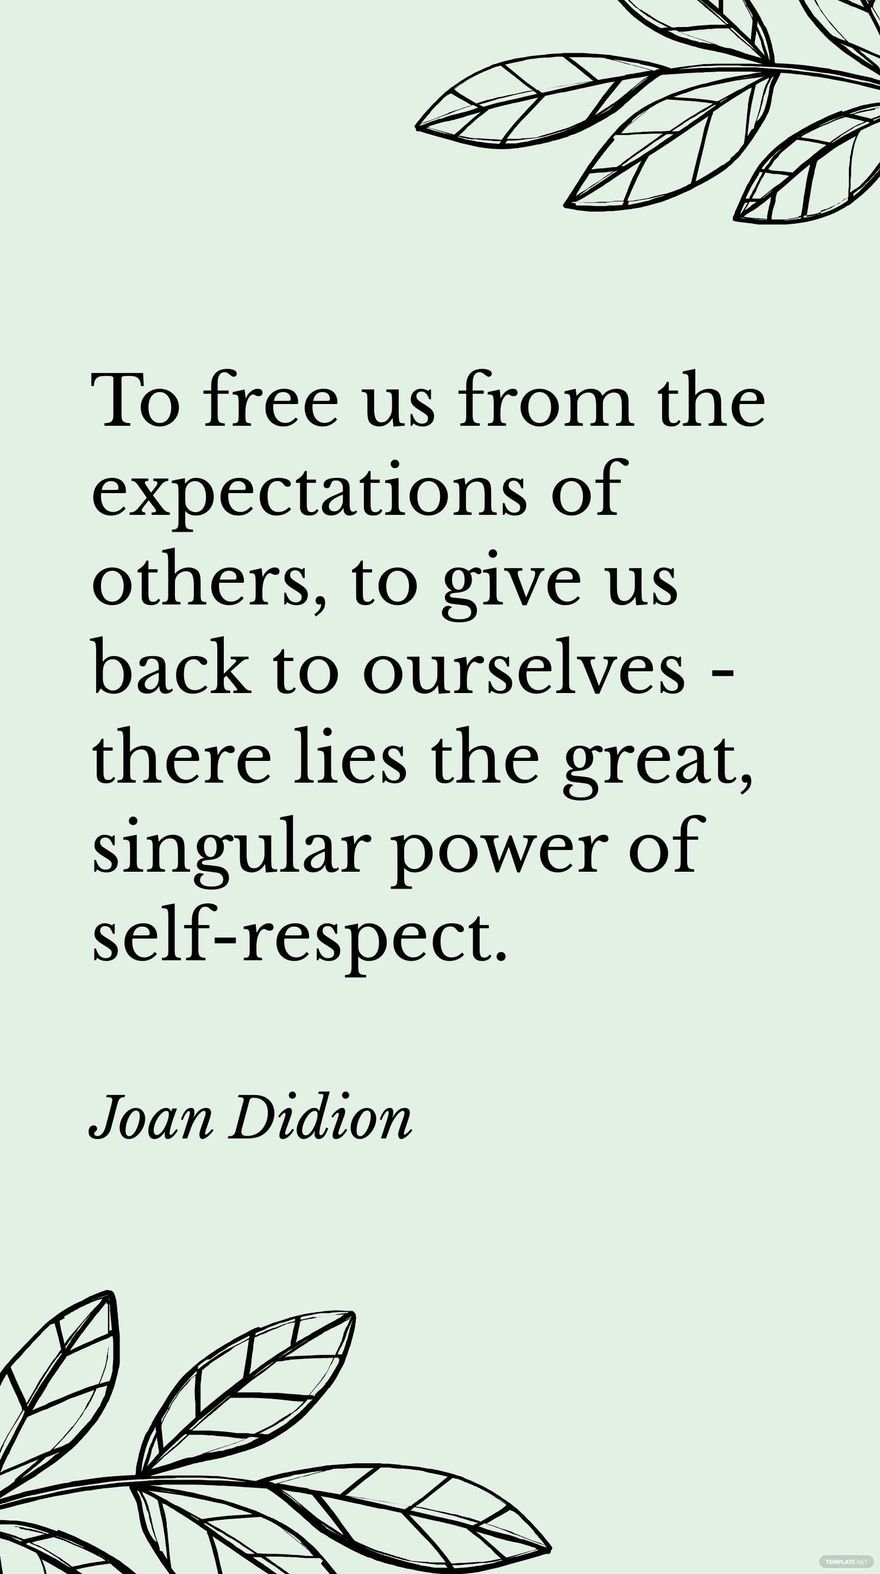 Free Joan Didion - To us from the expectations of others, to give us back to ourselves - there lies the great, singular power of self-respect. in JPG